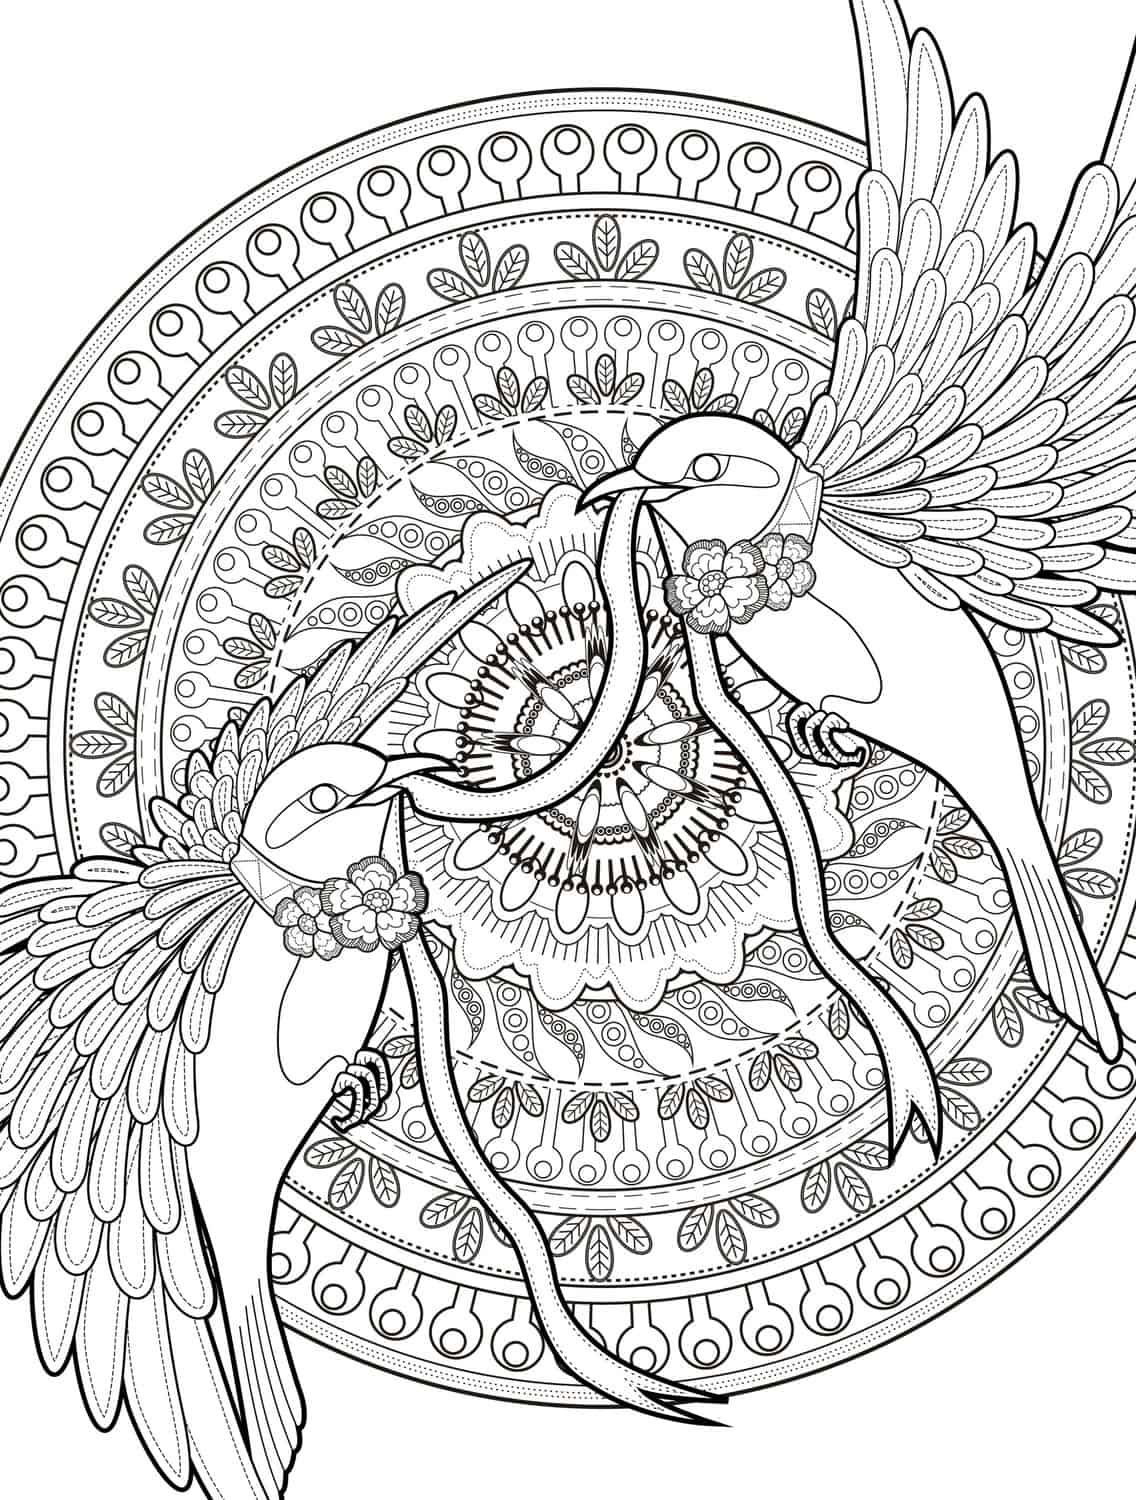 Adult Coloring Pages Free 49